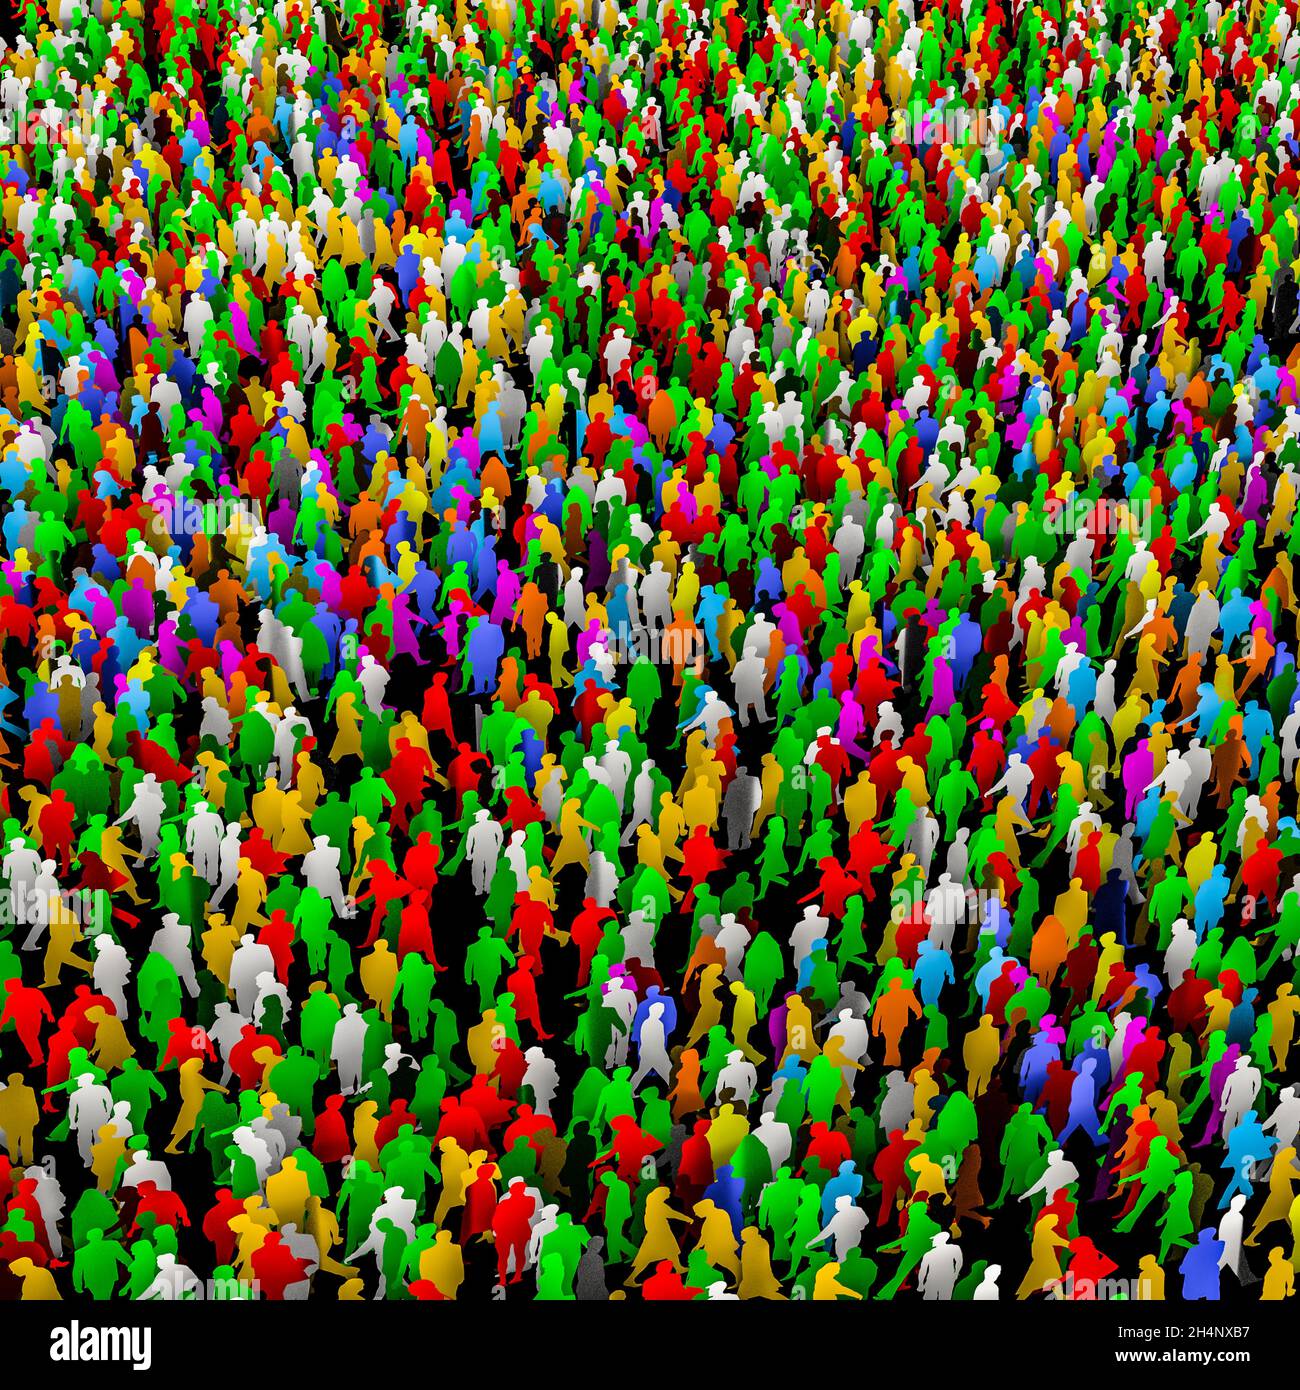 Giant crowd of people background - 3D illustration of huge multi coloured abstract pedestrian throng Stock Photo